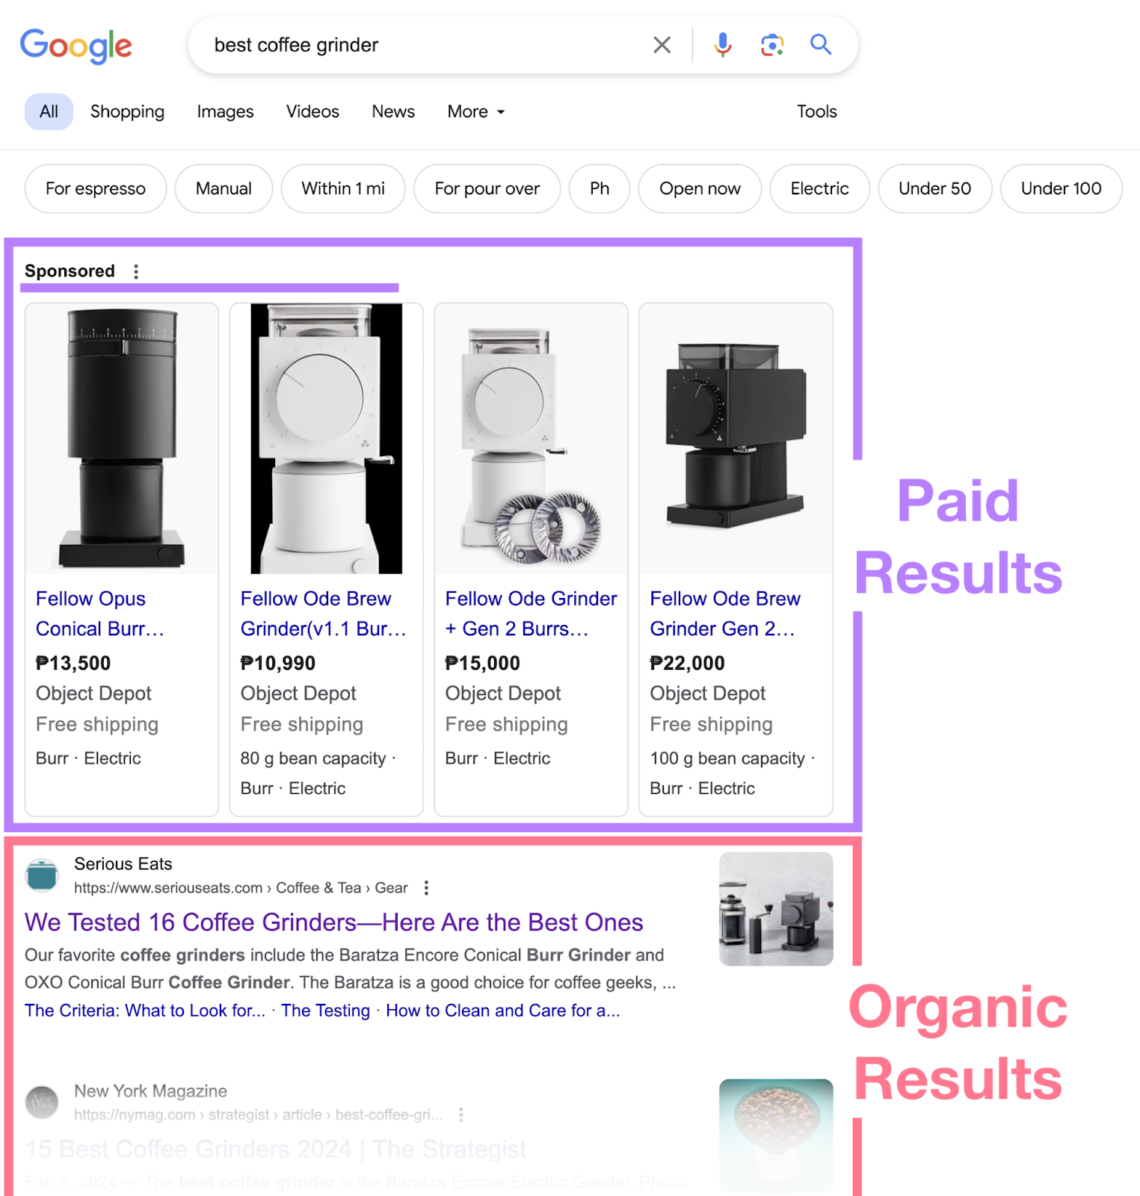 Google search results showing paid search results and organic search results.